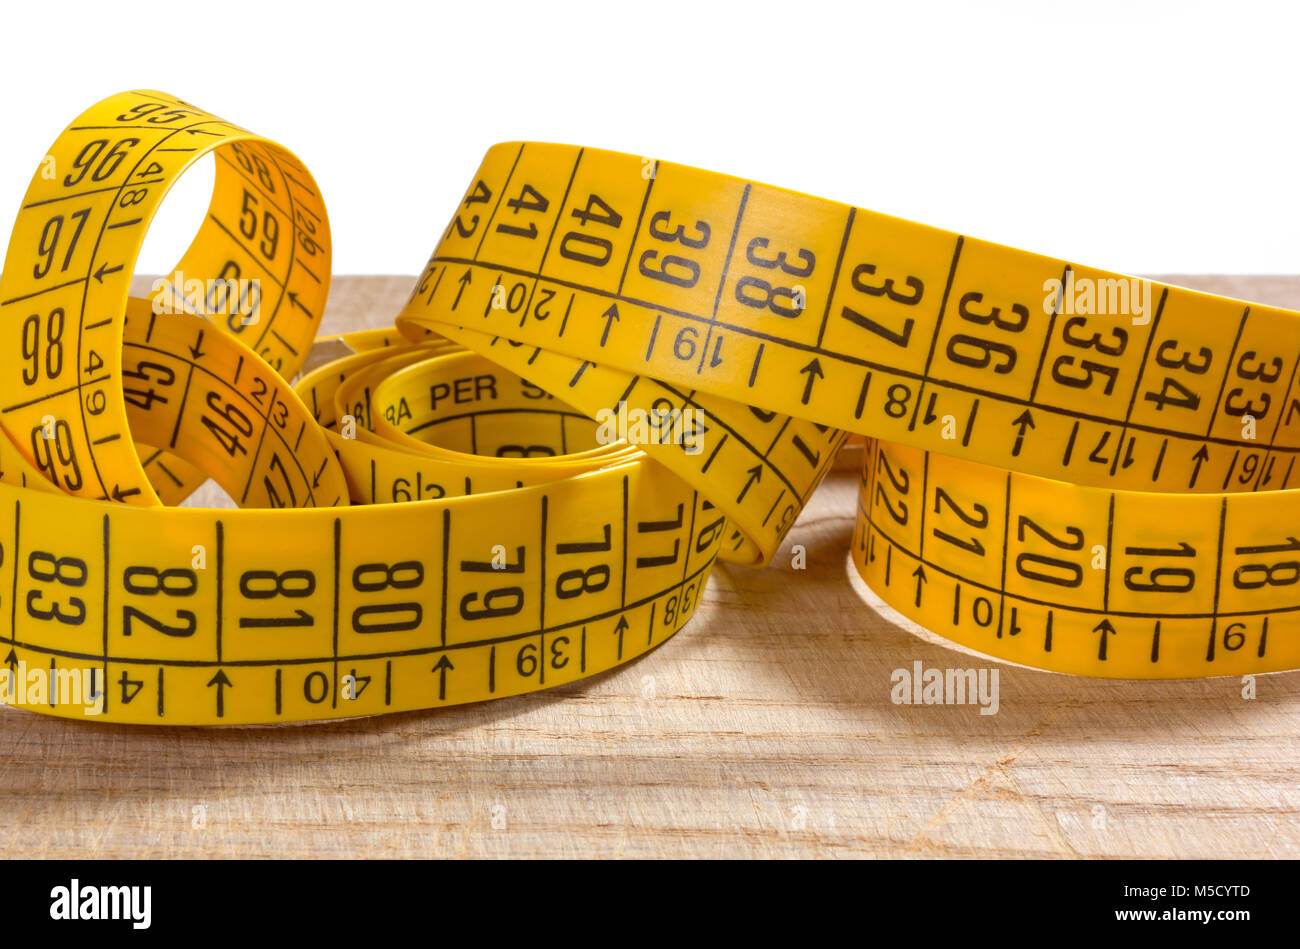 https://c8.alamy.com/comp/M5CYTD/rolled-up-yellow-tailor-measuring-tape-on-an-old-wooden-surface-M5CYTD.jpg